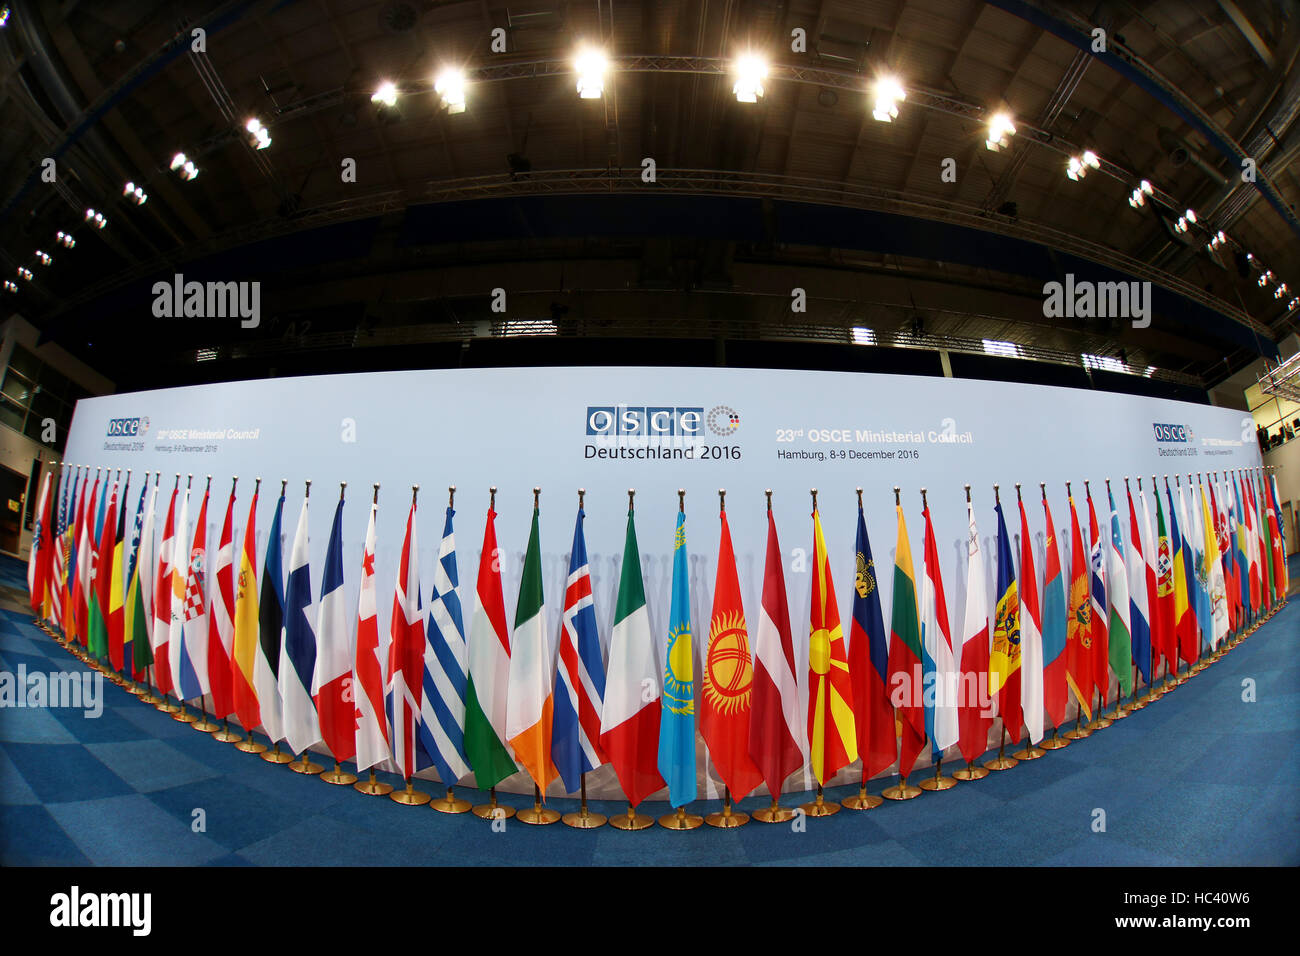 Hamburg, Germany. 7th Dec, 2016. Flags of the OSCE member states pictured in the media centre at the exhibition halls in Hamburg, Germany, 7 December 2016. According to the German foreign minsitry, 50 foreign ministers of the 57 OSCE member states have registered for the conference of the OSCE council of ministers on 8 and 9 December. Photo: Christian Charisius/dpa/Alamy Live News Stock Photo